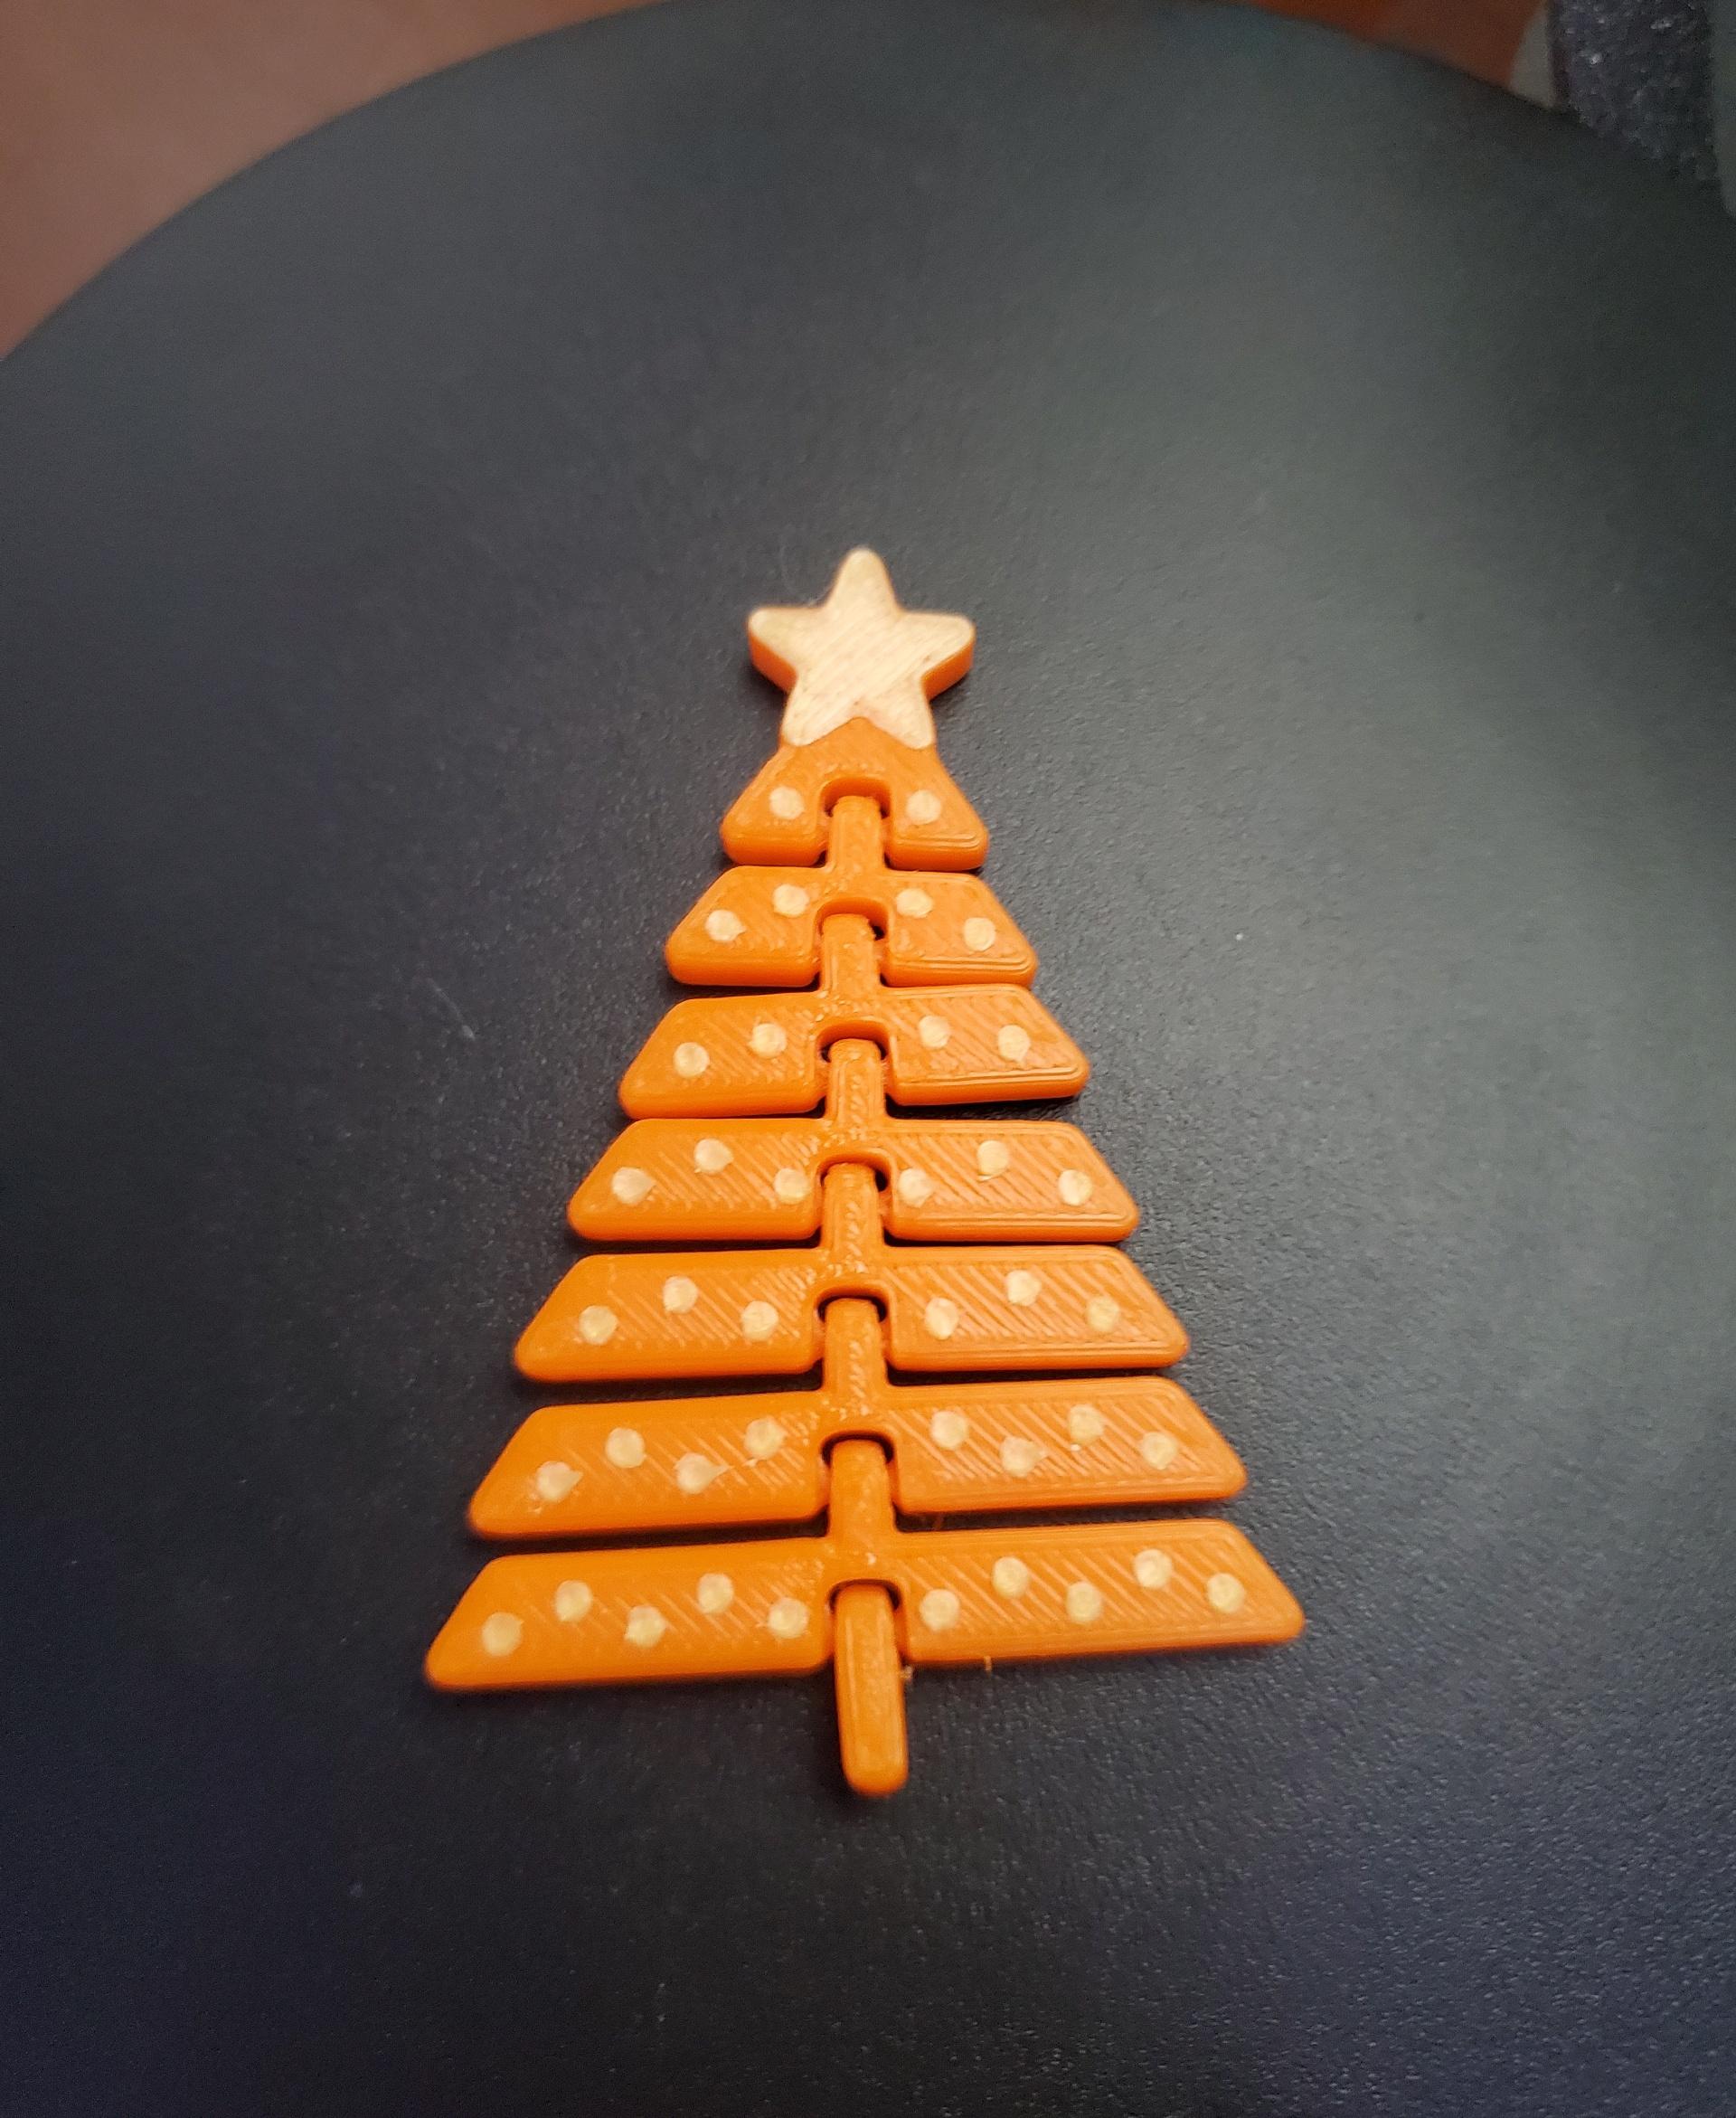 Articulated Christmas Tree with Star and Ornaments - Print in place fidget toys - 3mf - polymaker orange pla pro - 3d model